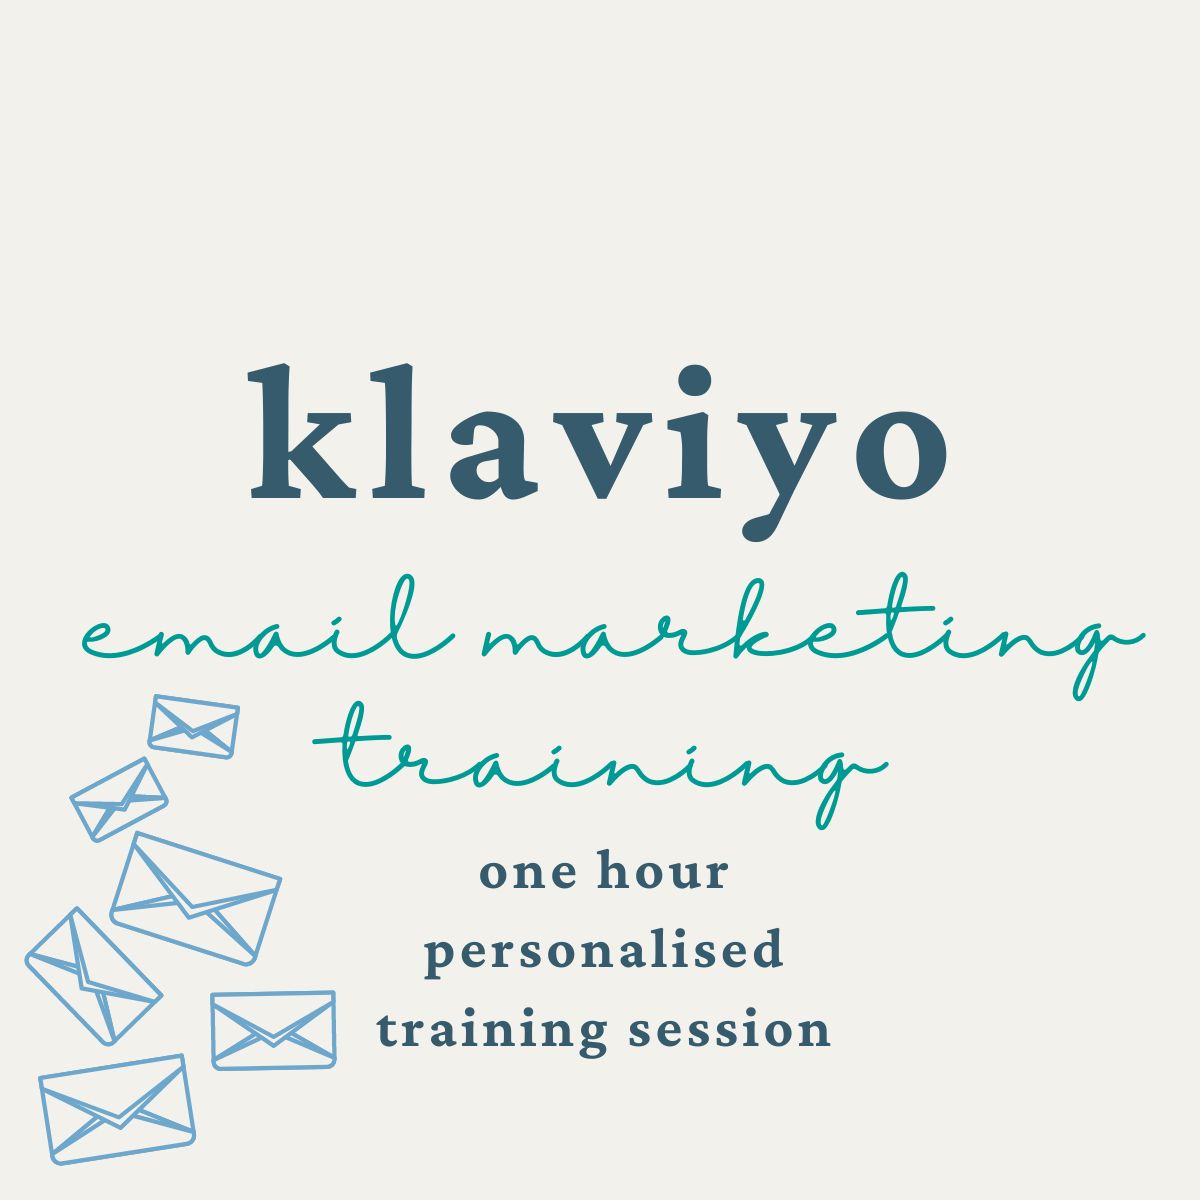 Email By Design Klaviyo Email Marketing Training personalised for your brand - One Hour